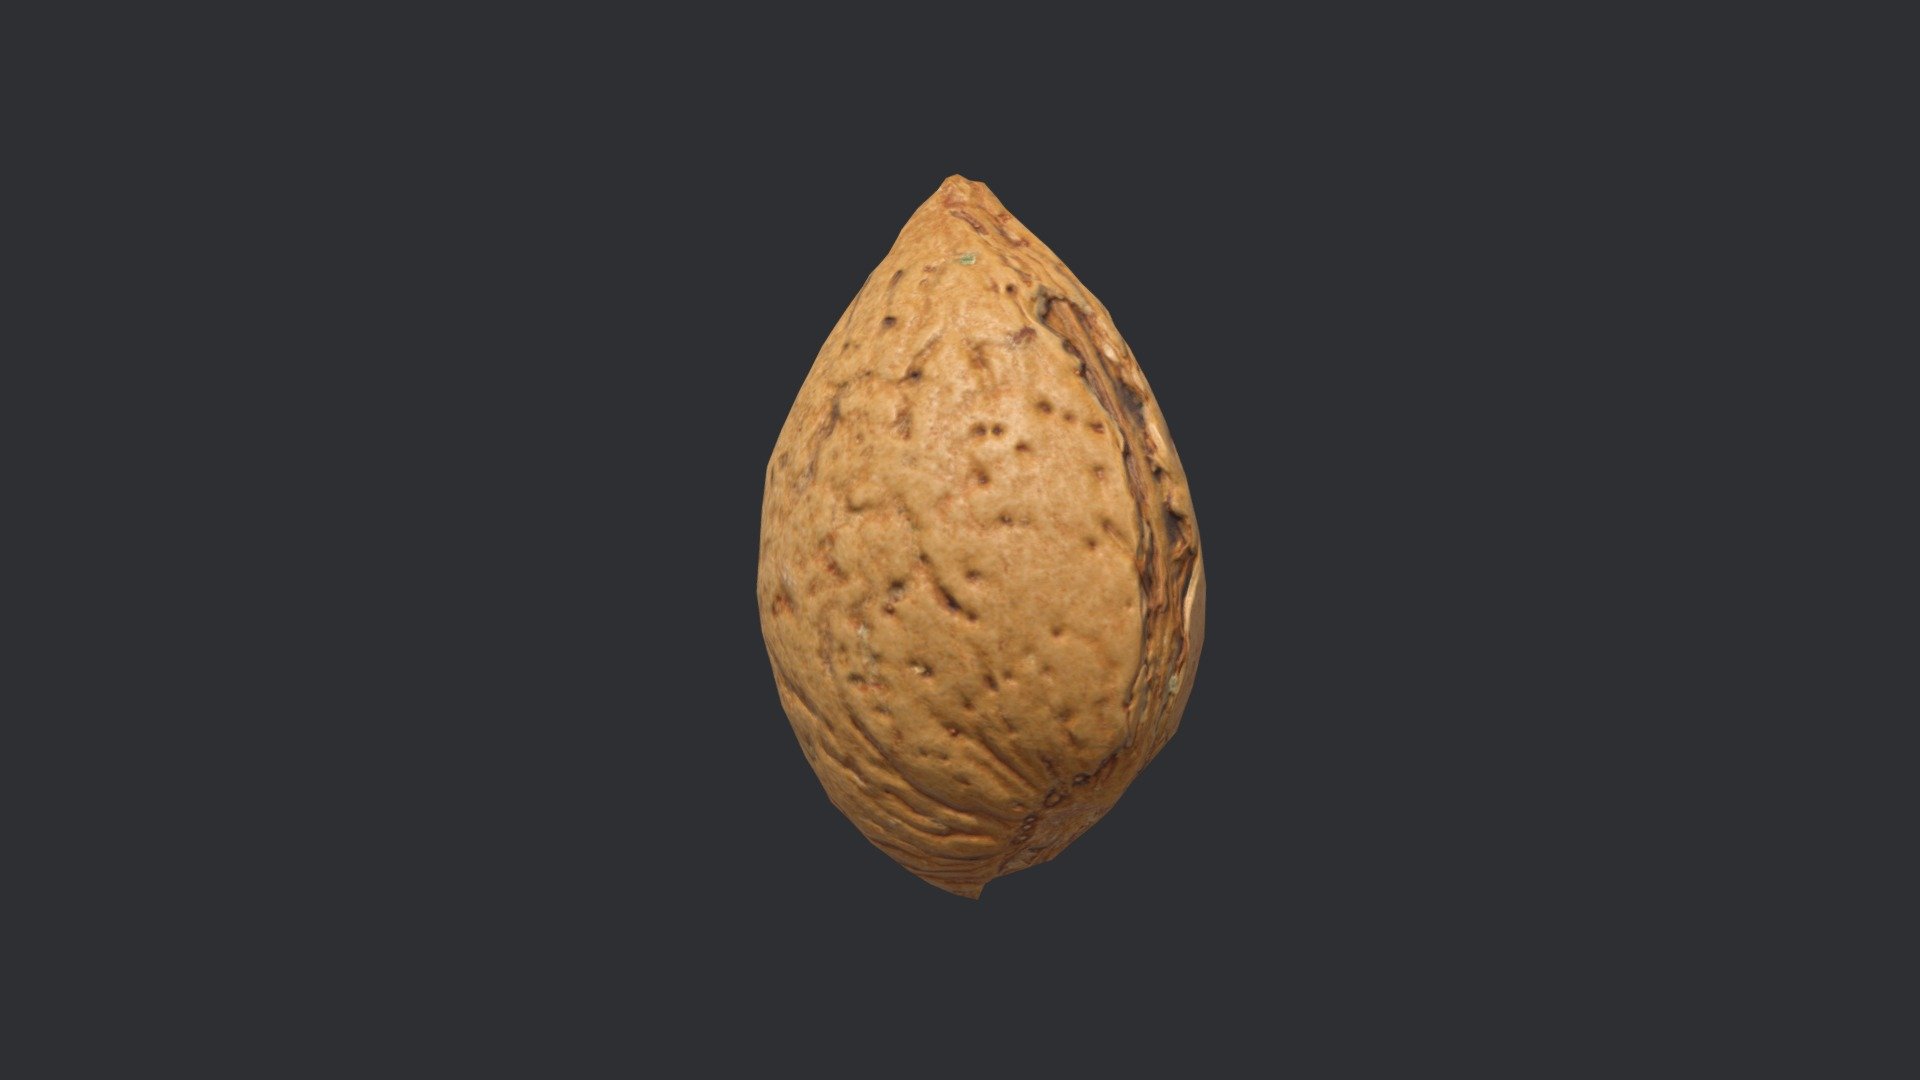 Photogrammetry model of an unshelled almond.

The model has three base levels of detail, optimized into triangles with clean UVs.

LOD1 = 20,480 tris,

LOD2 = 1,280 tris,

LOD3 = 320 tris.

The model has 4K PNG textures (Albedo, Normal, Ambient Occlusion, Roughness and Gloss). All levels of detail share the same textures except for the Normal, where each LOD has a unique Normal map.

Lod 2 used for 3D preview with 1K JPG textures.

Real world scale 3d model